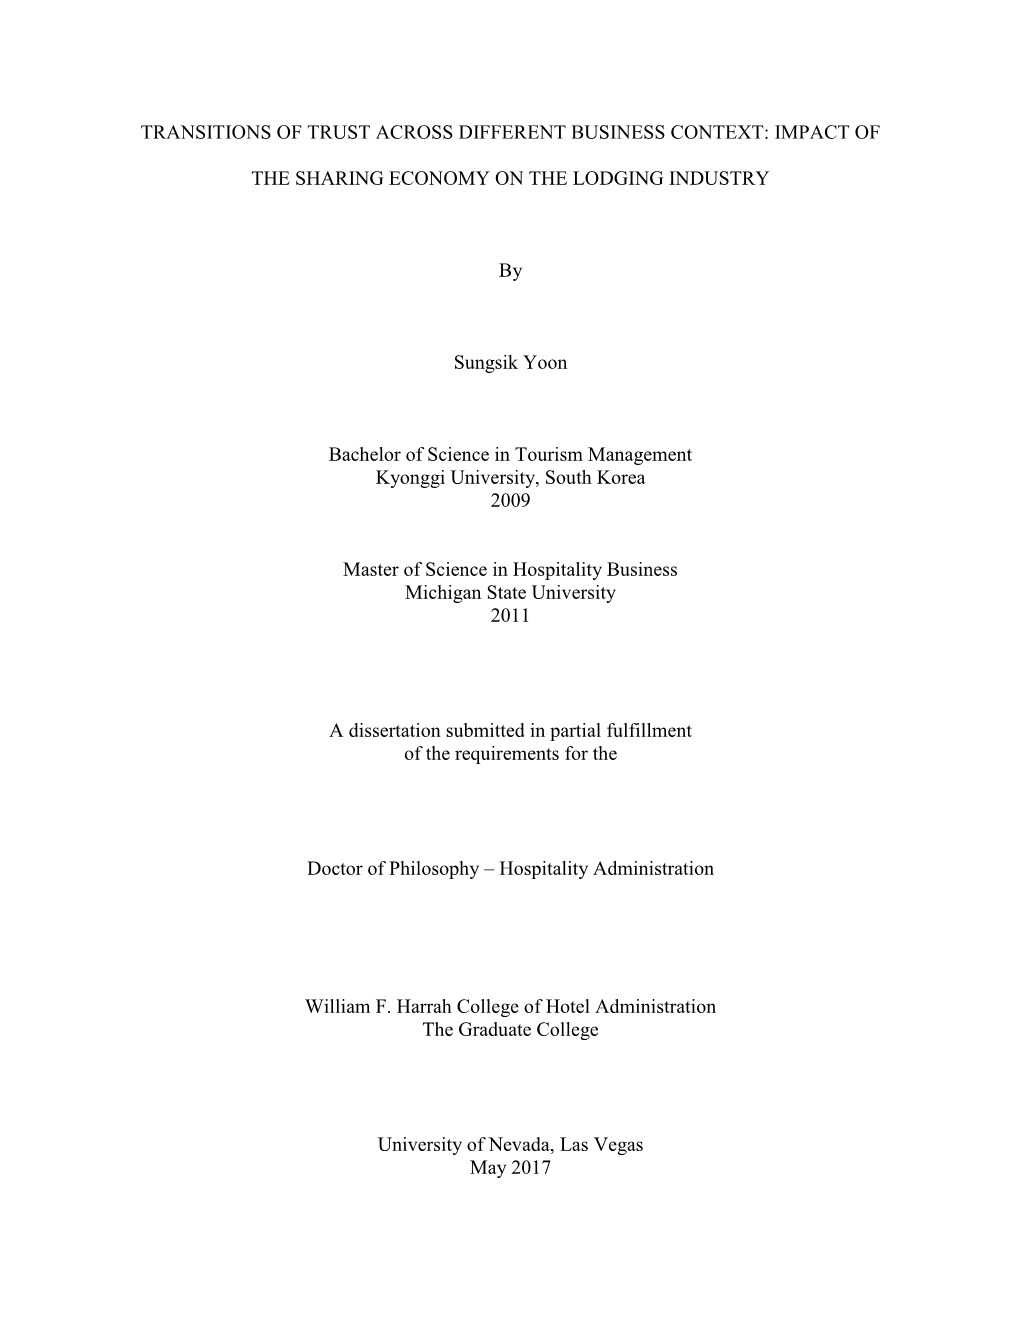 TRANSITIONS of TRUST ACROSS DIFFERENT BUSINESS CONTEXT: IMPACT of the SHARING ECONOMY on the LODGING INDUSTRY by Sungsik Yoon Ba